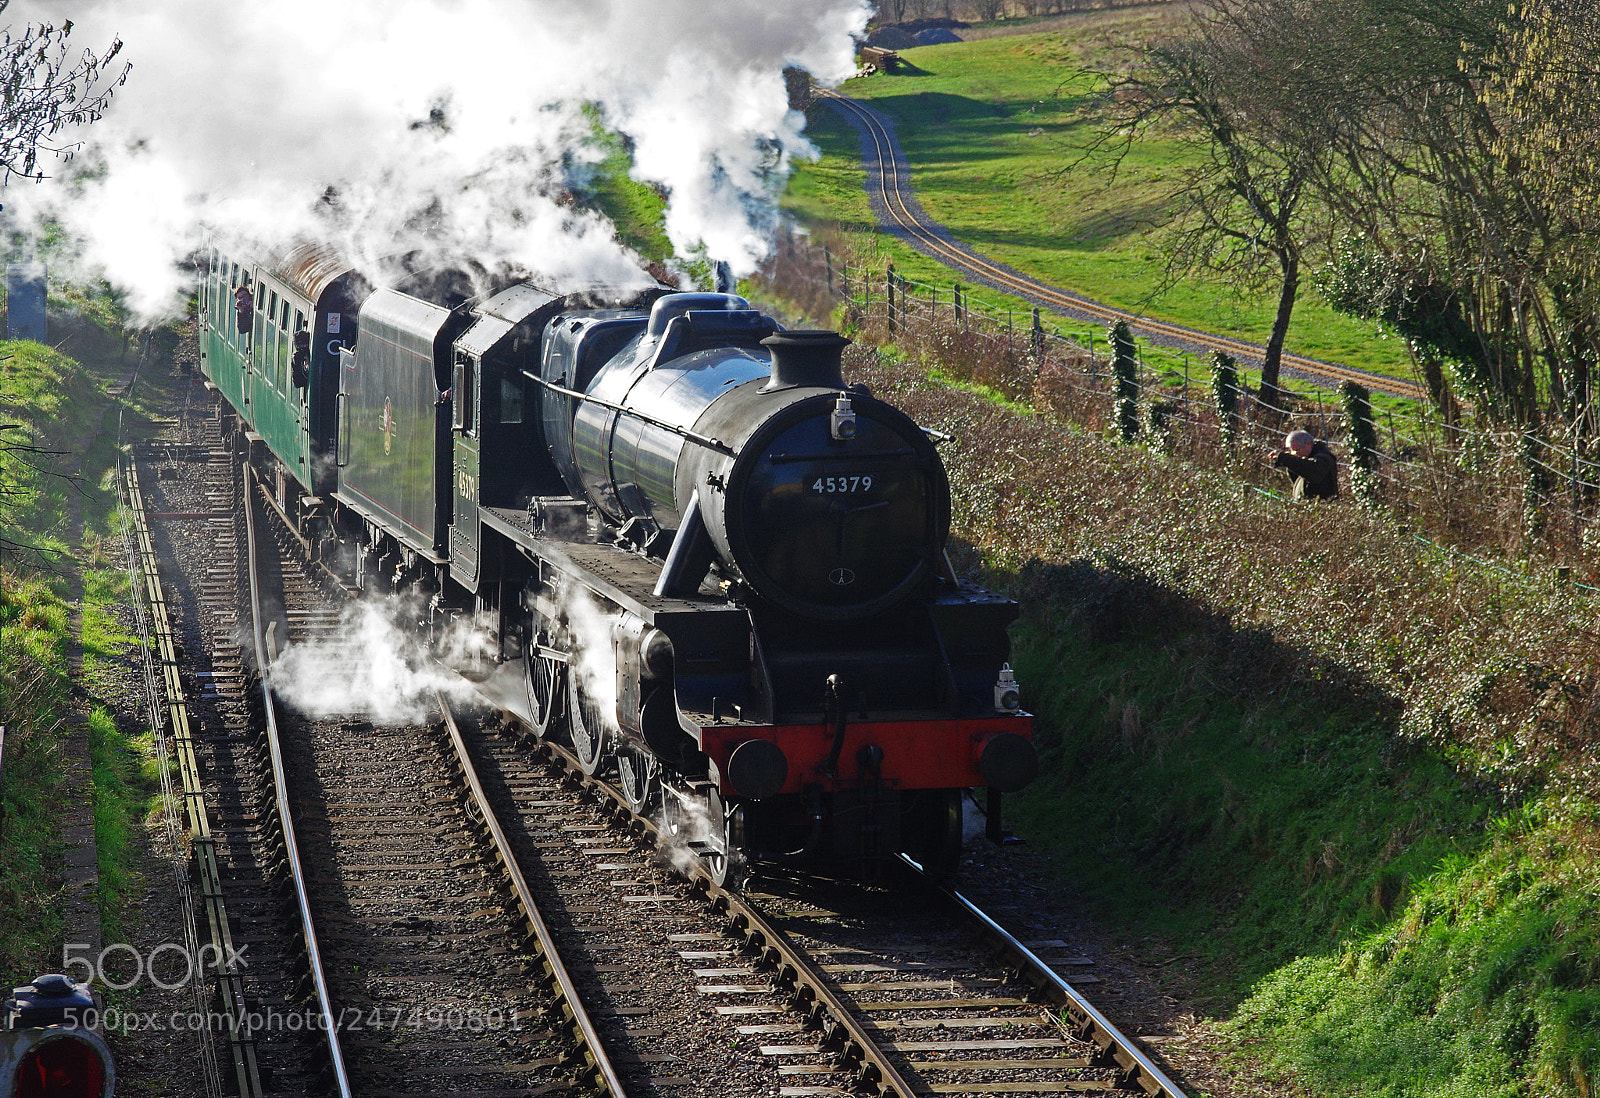 Pentax K-3 sample photo. Rd16272.  45379 arriving at ropley. photography